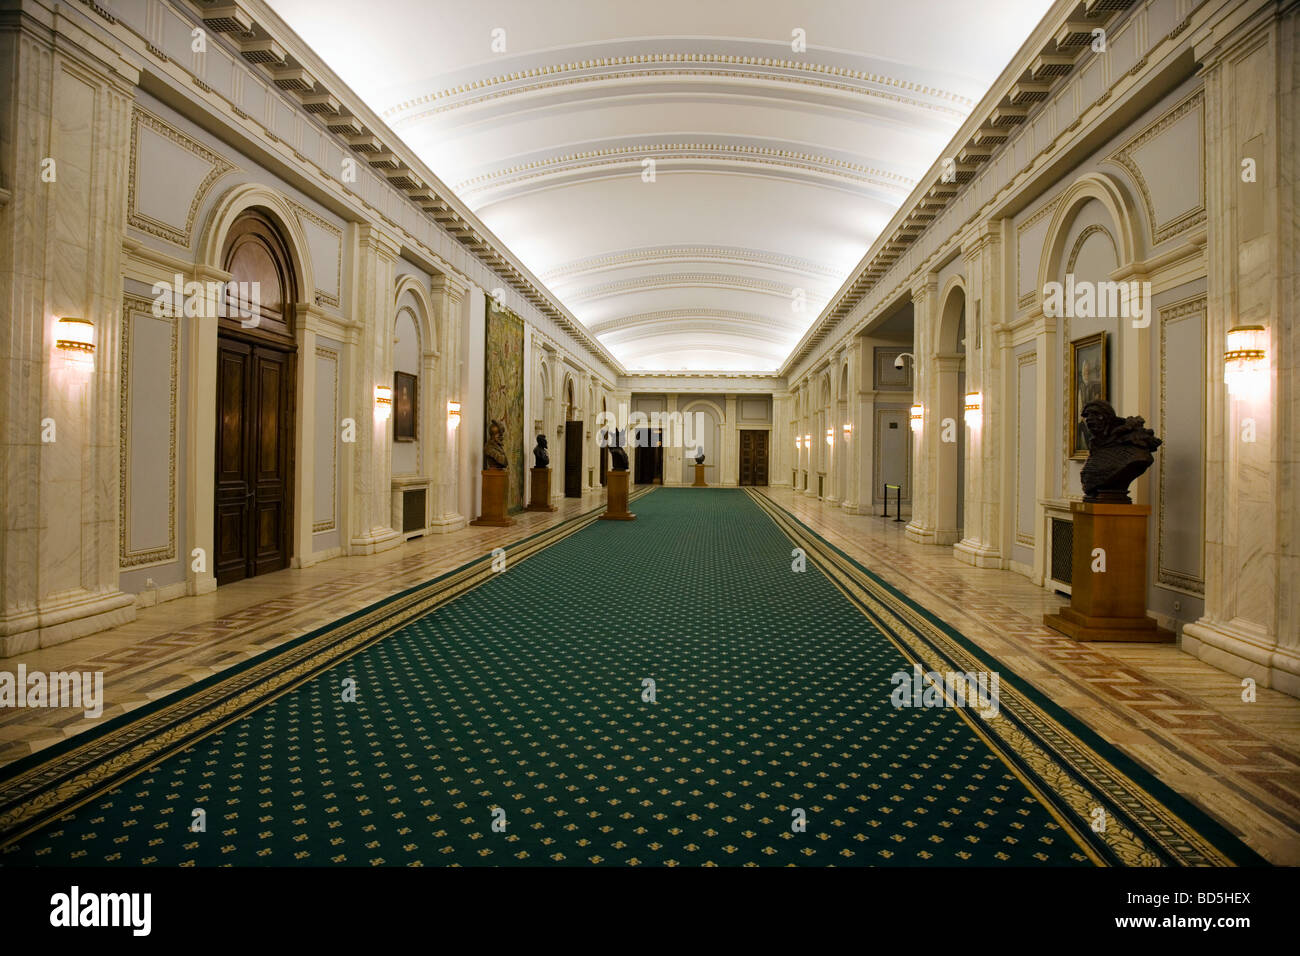 Palace of the Parliament interior Bucharest Stock Photo